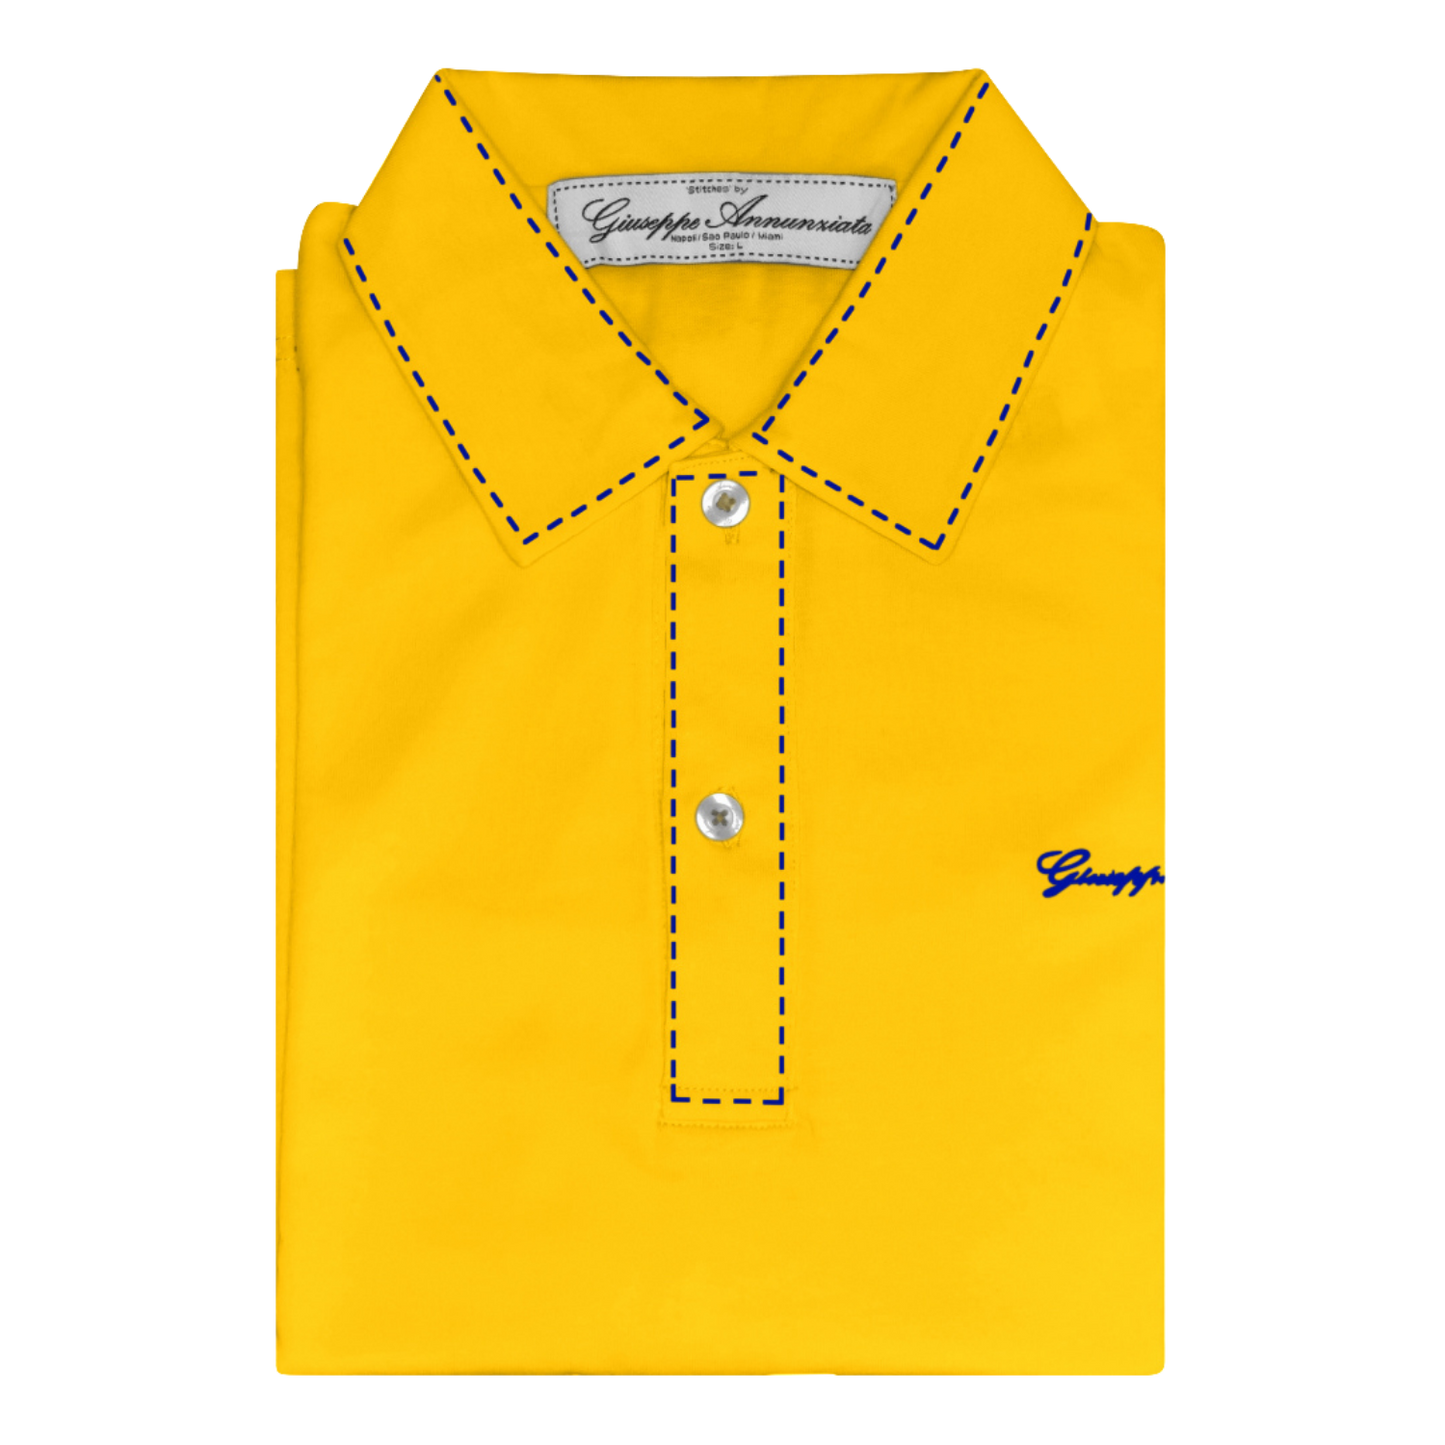 Stitches Polo Yellow and Blue